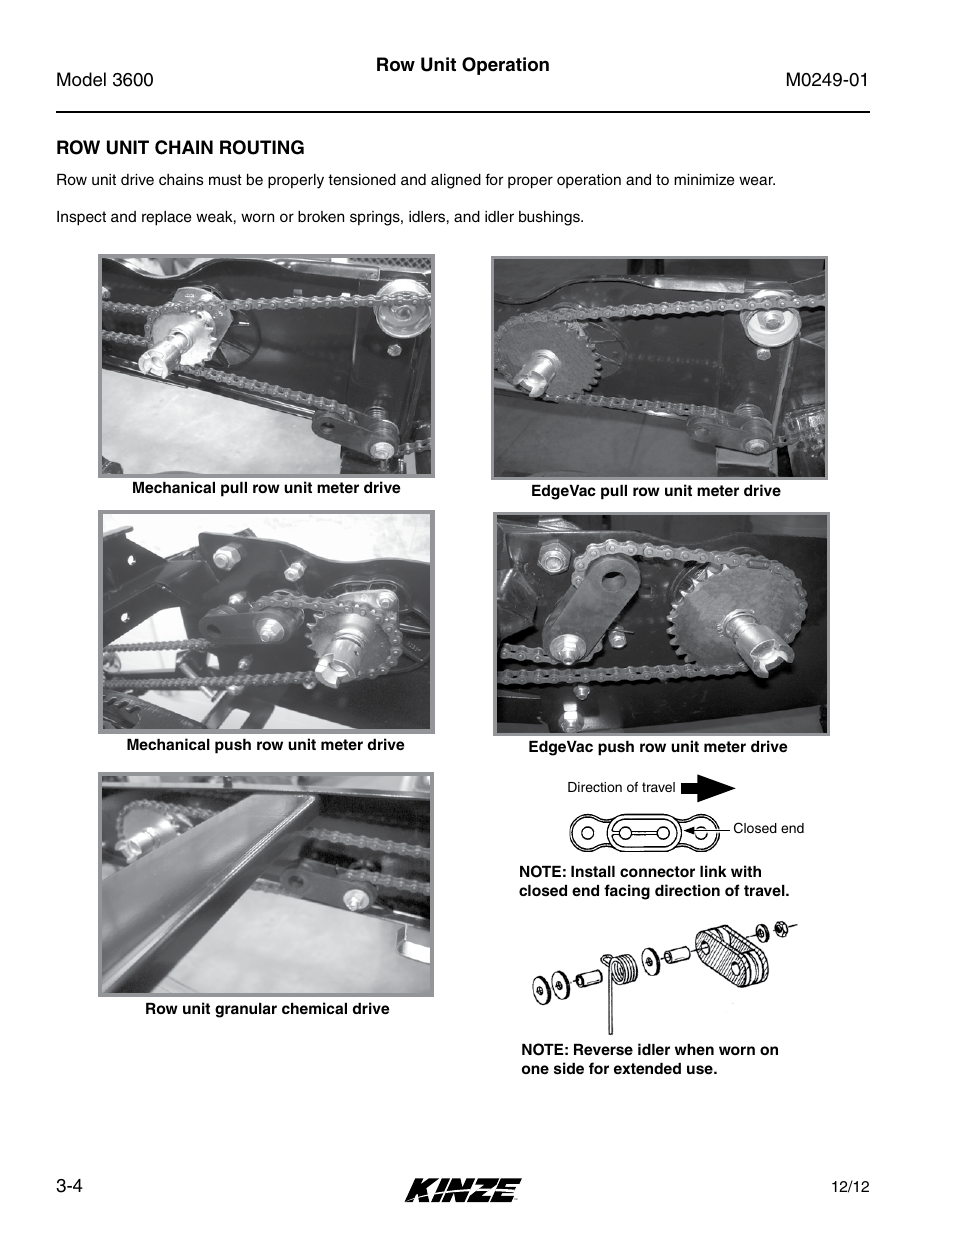 Row unit chain routing, Row unit chain routing -4 | Kinze 3600 Lift and Rotate Planter (70 CM) Rev. 5/14 User Manual | Page 52 / 158